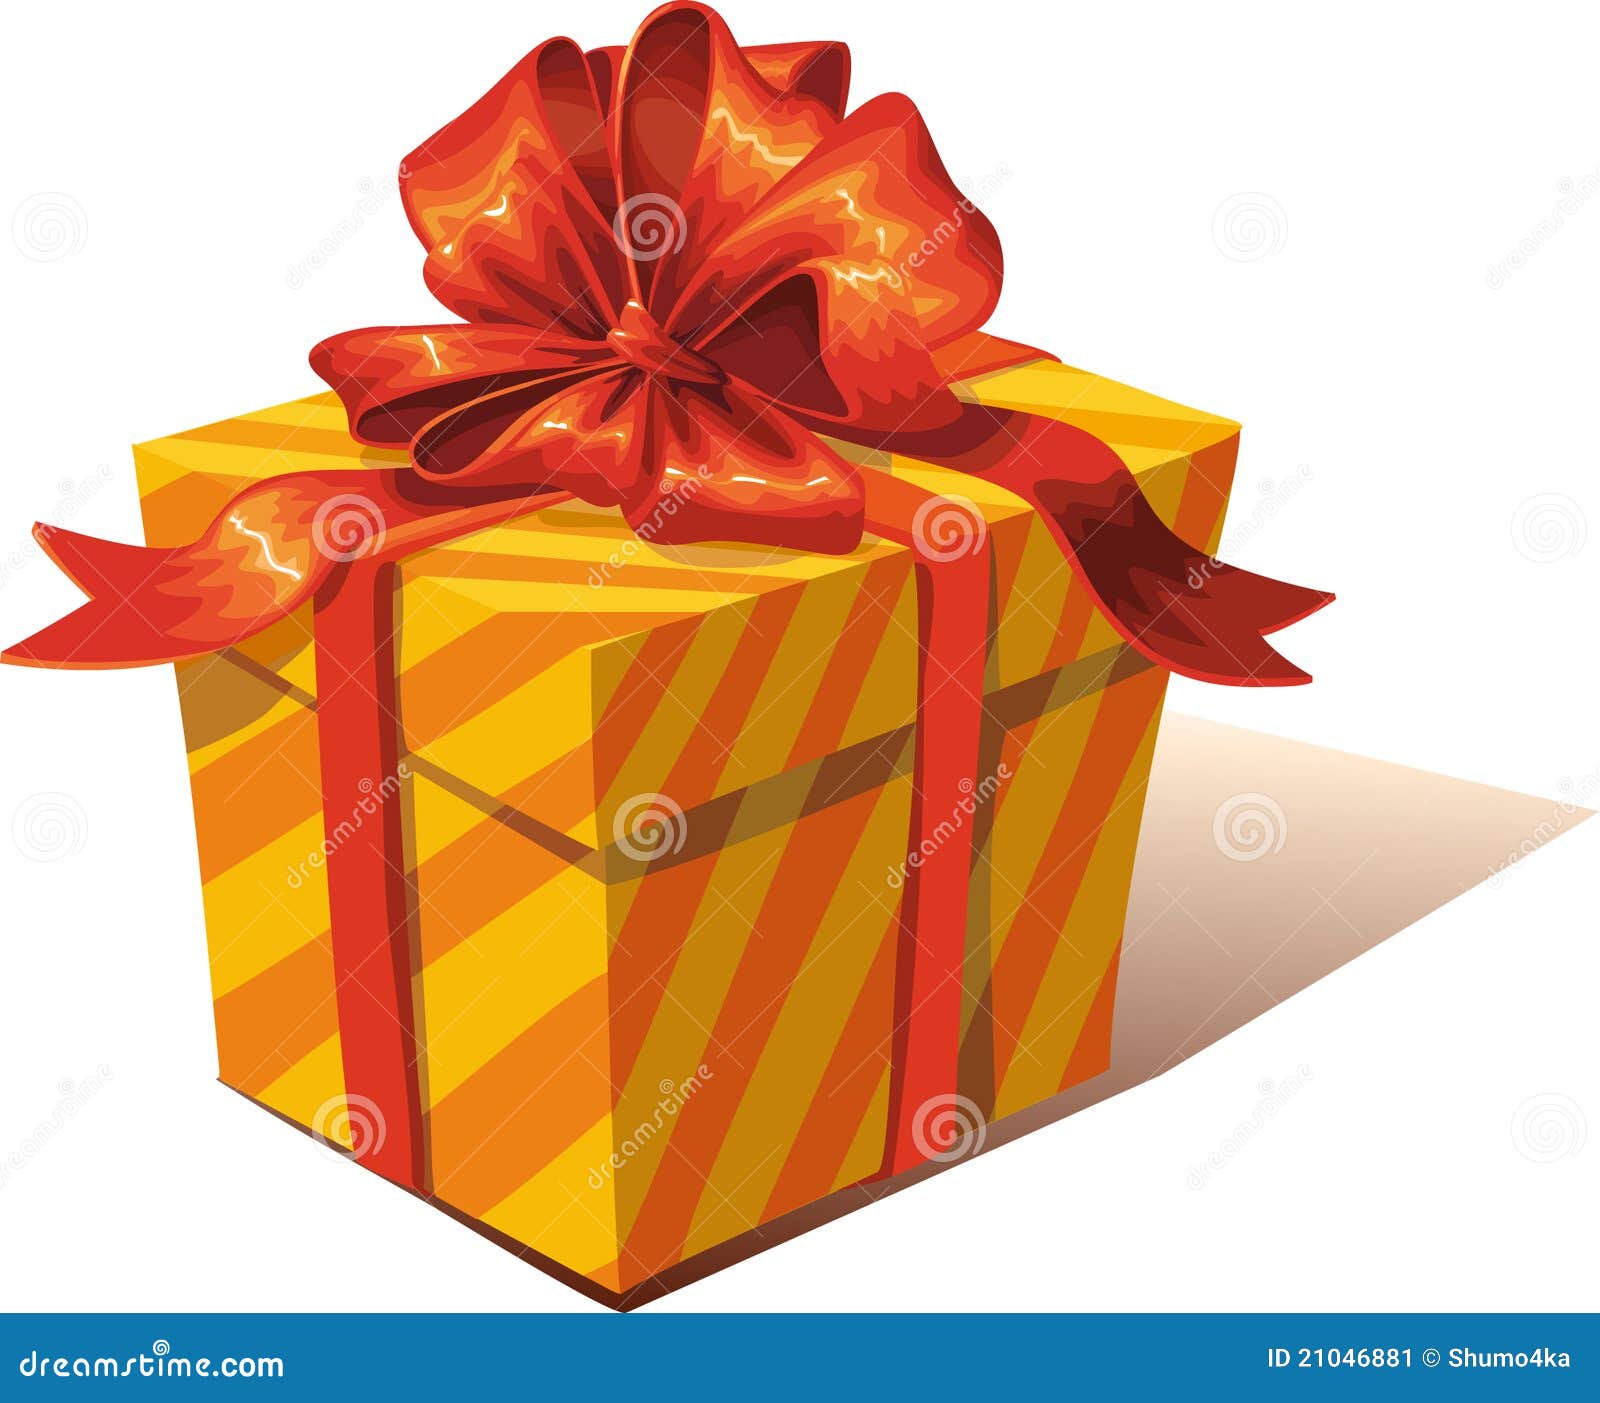 Vector Illustration Of Gift Box With Ribbon On White Stock Illustration ...